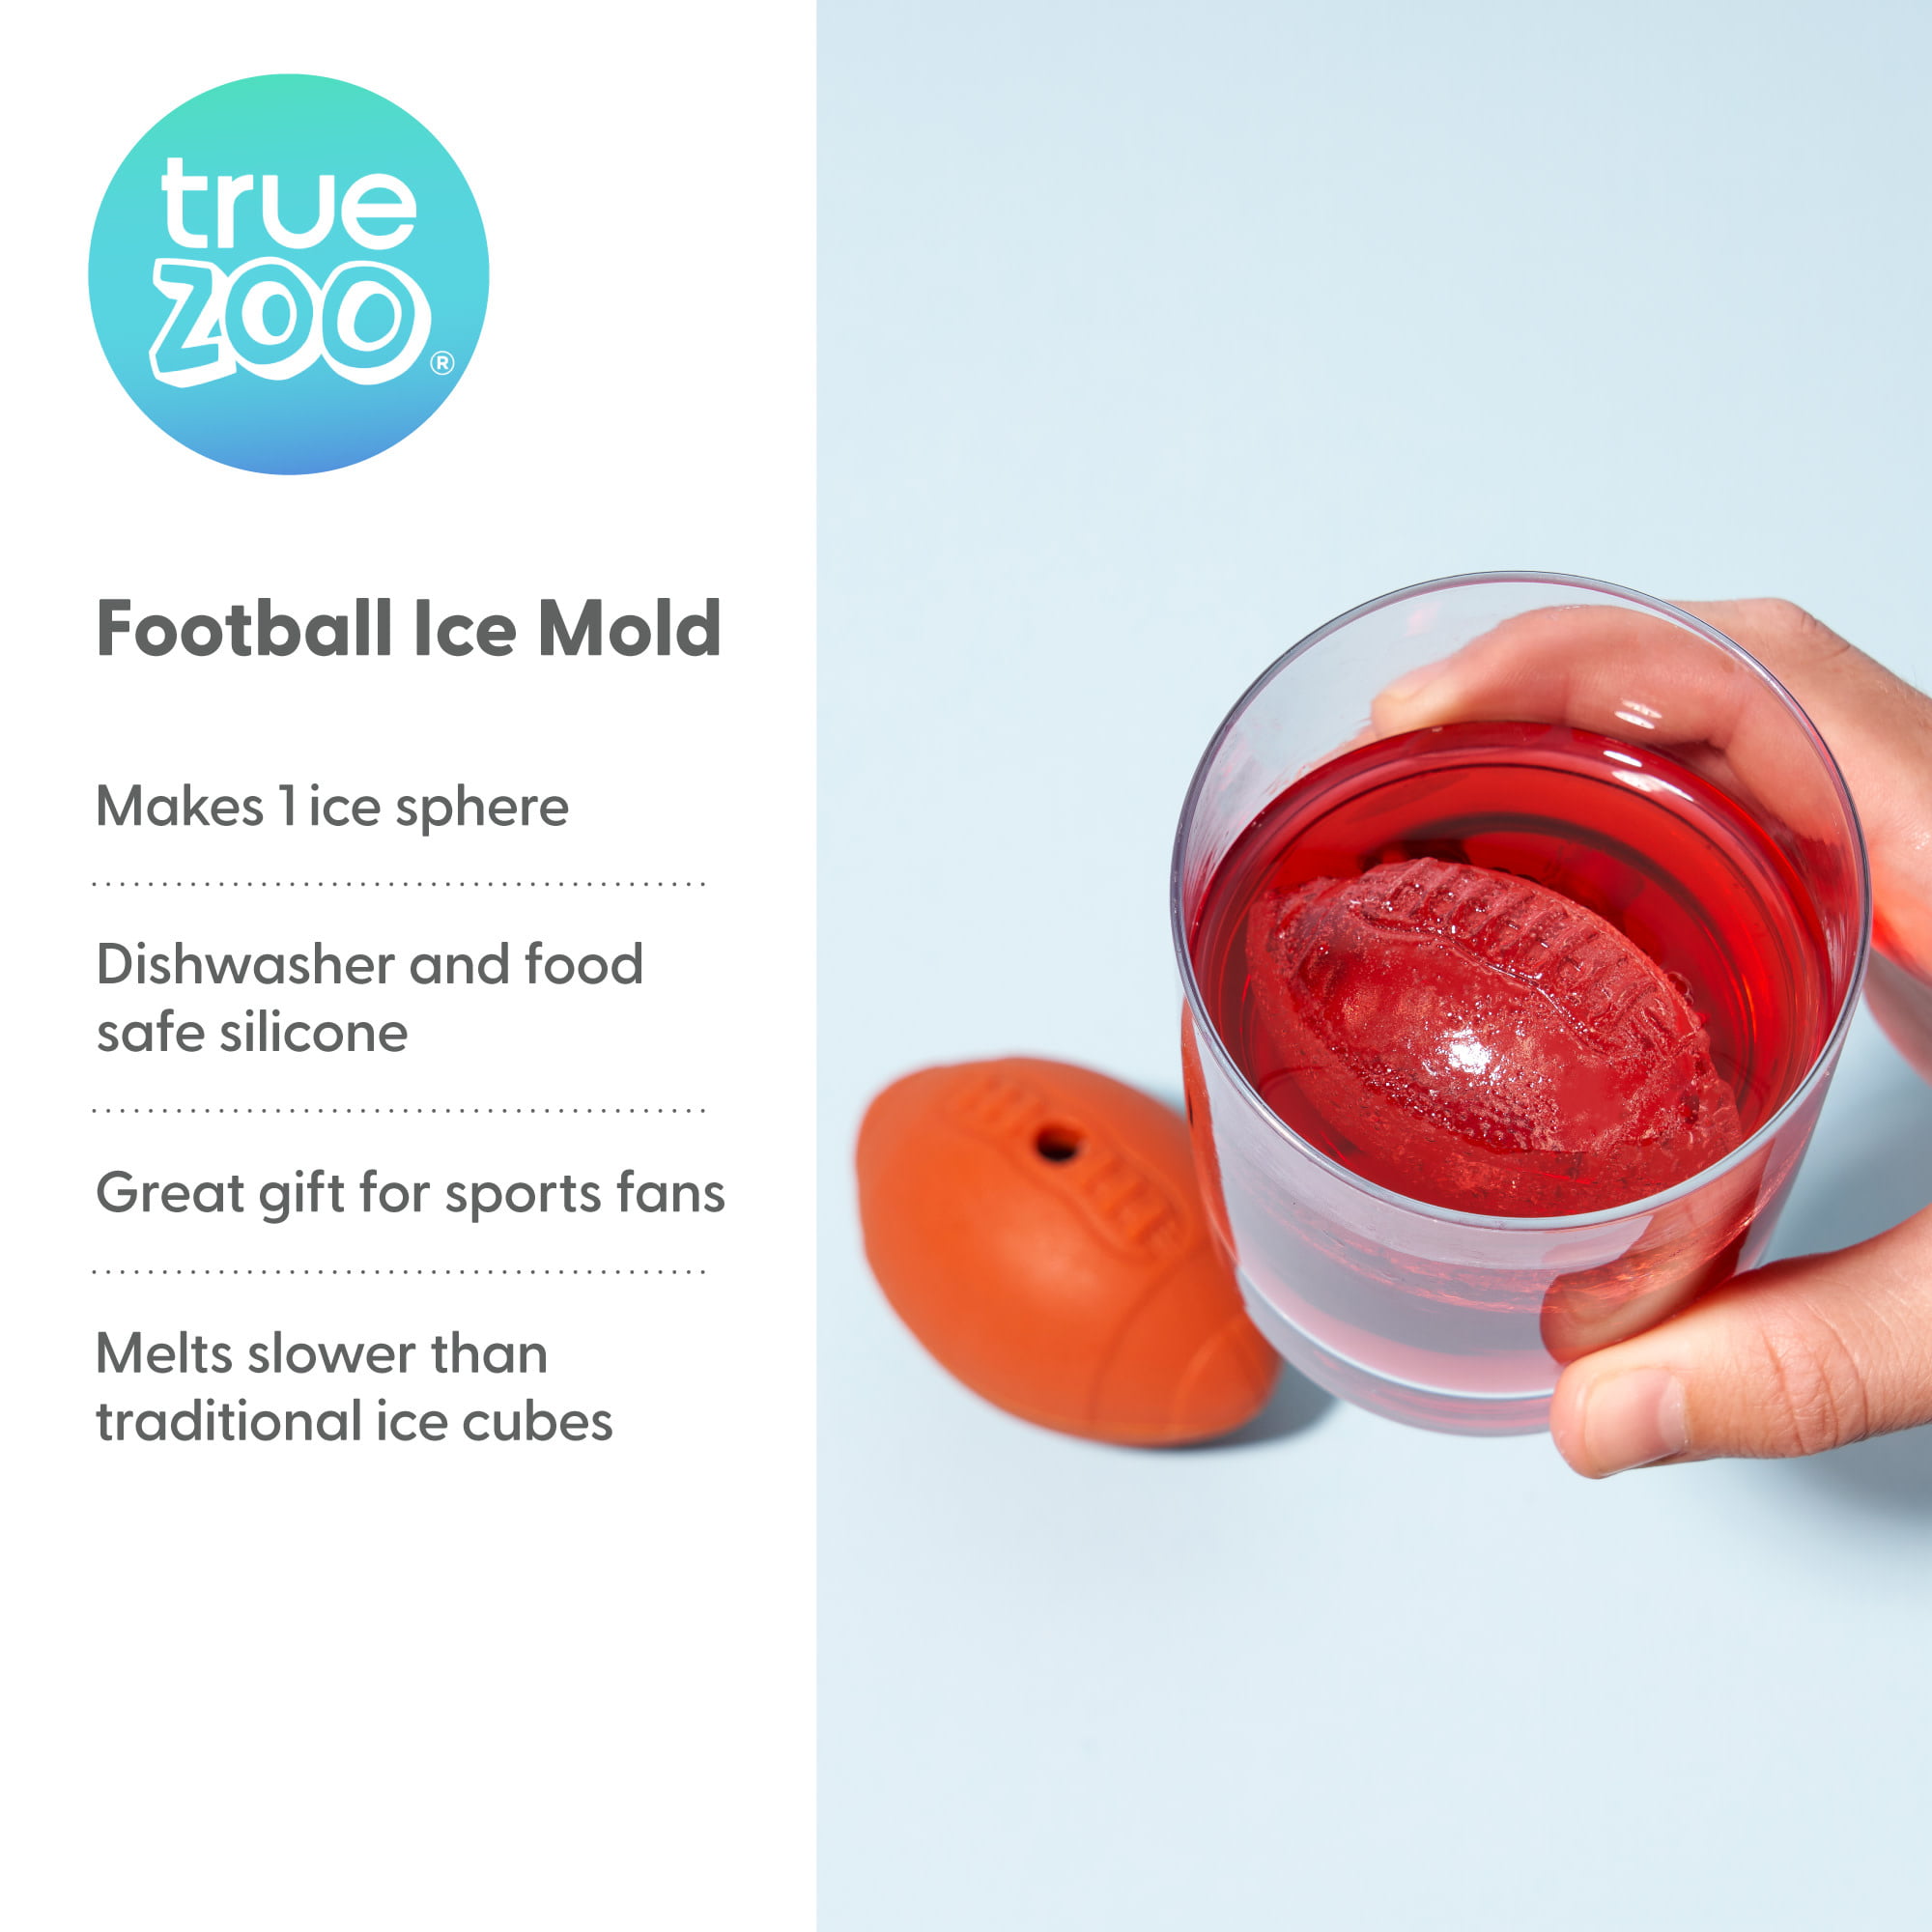 ACOOKEE Silicone Football Ice Cube Mold Fun Shapes, Novelty Football Gifts,  2.2 Large Craft Round Sphere Ice Ball Molds For Game Day, Whiskey